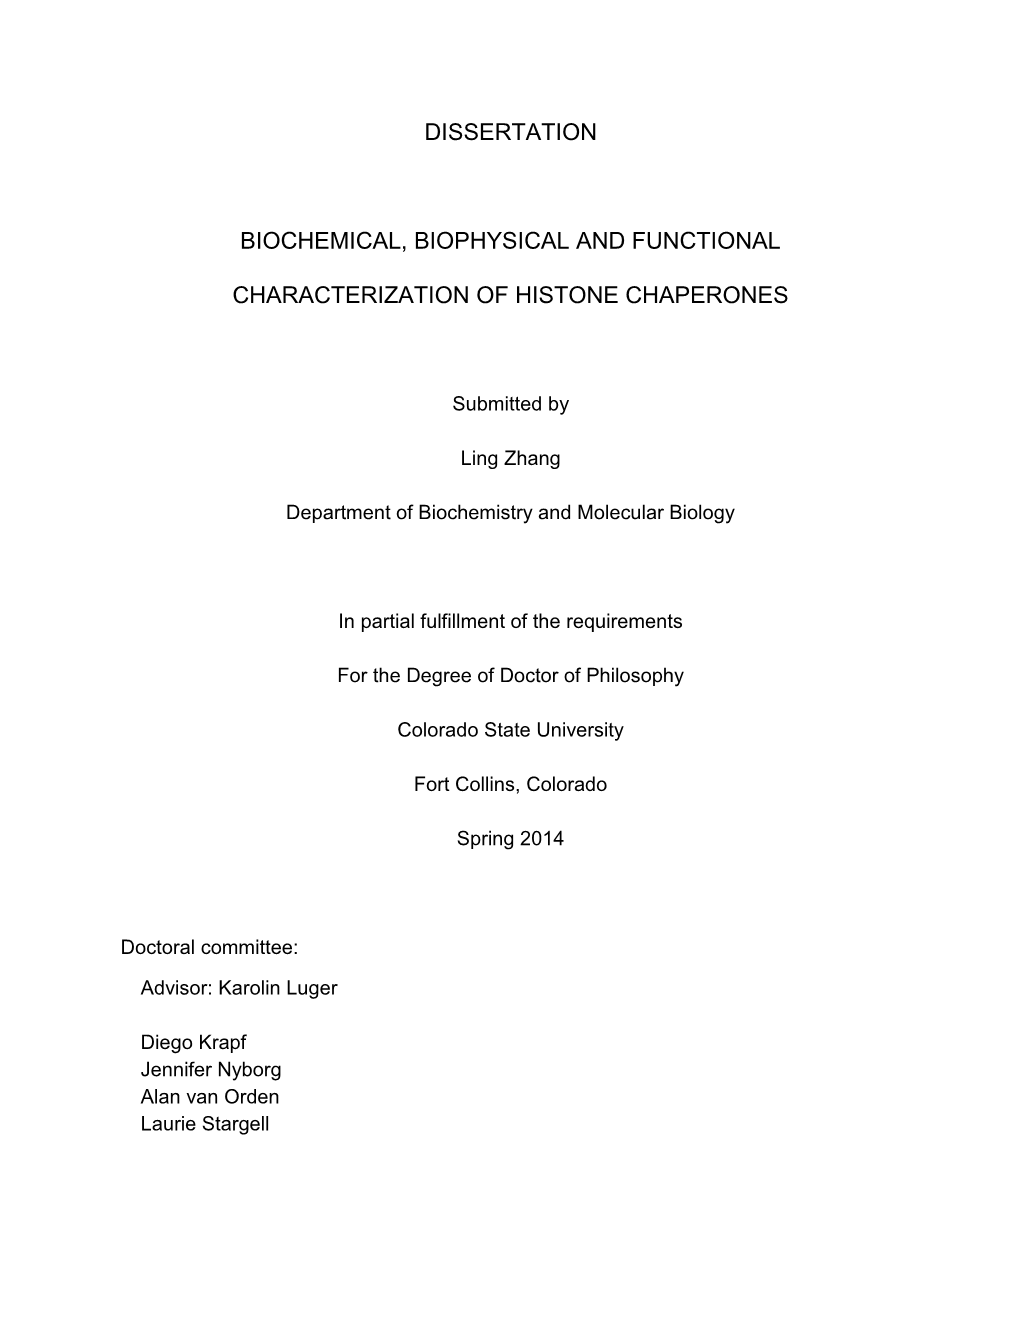 Dissertation Biochemical, Biophysical and Functional